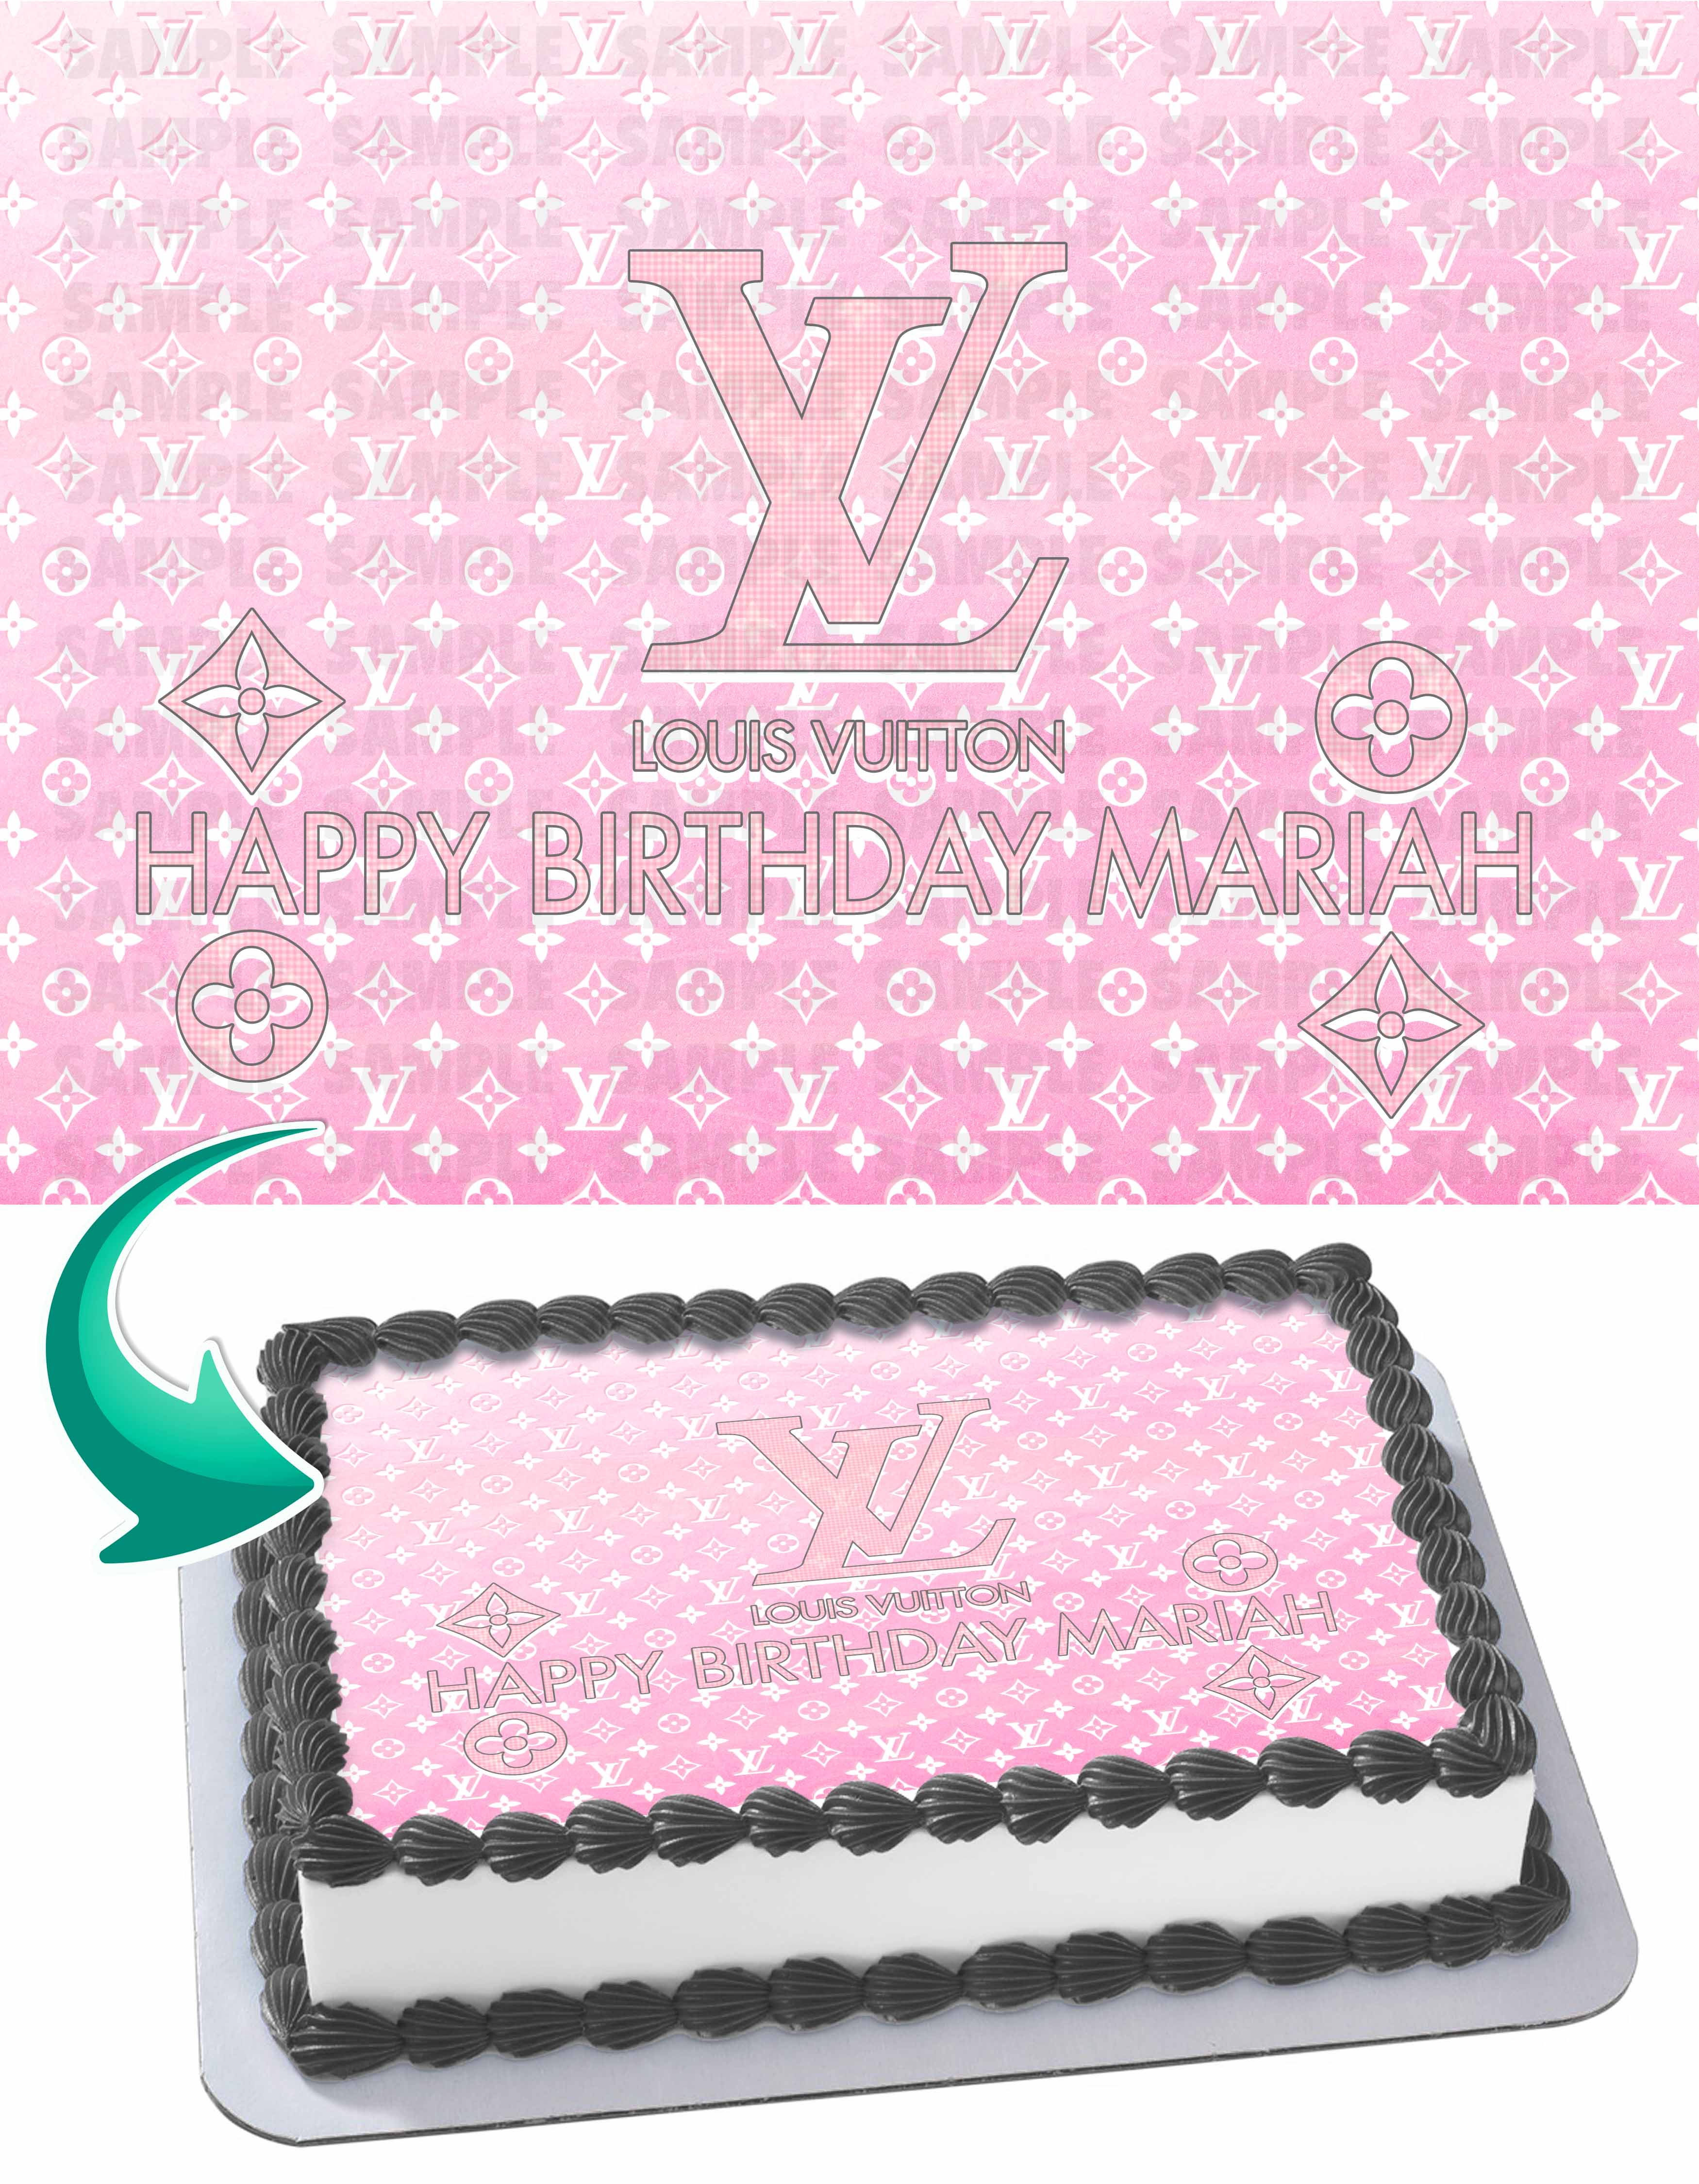 Louis Vuitton GLR Edible Image Cake Topper Personalized Birthday Sheet  Decoration Custom Party Frosting Transfer Fondant